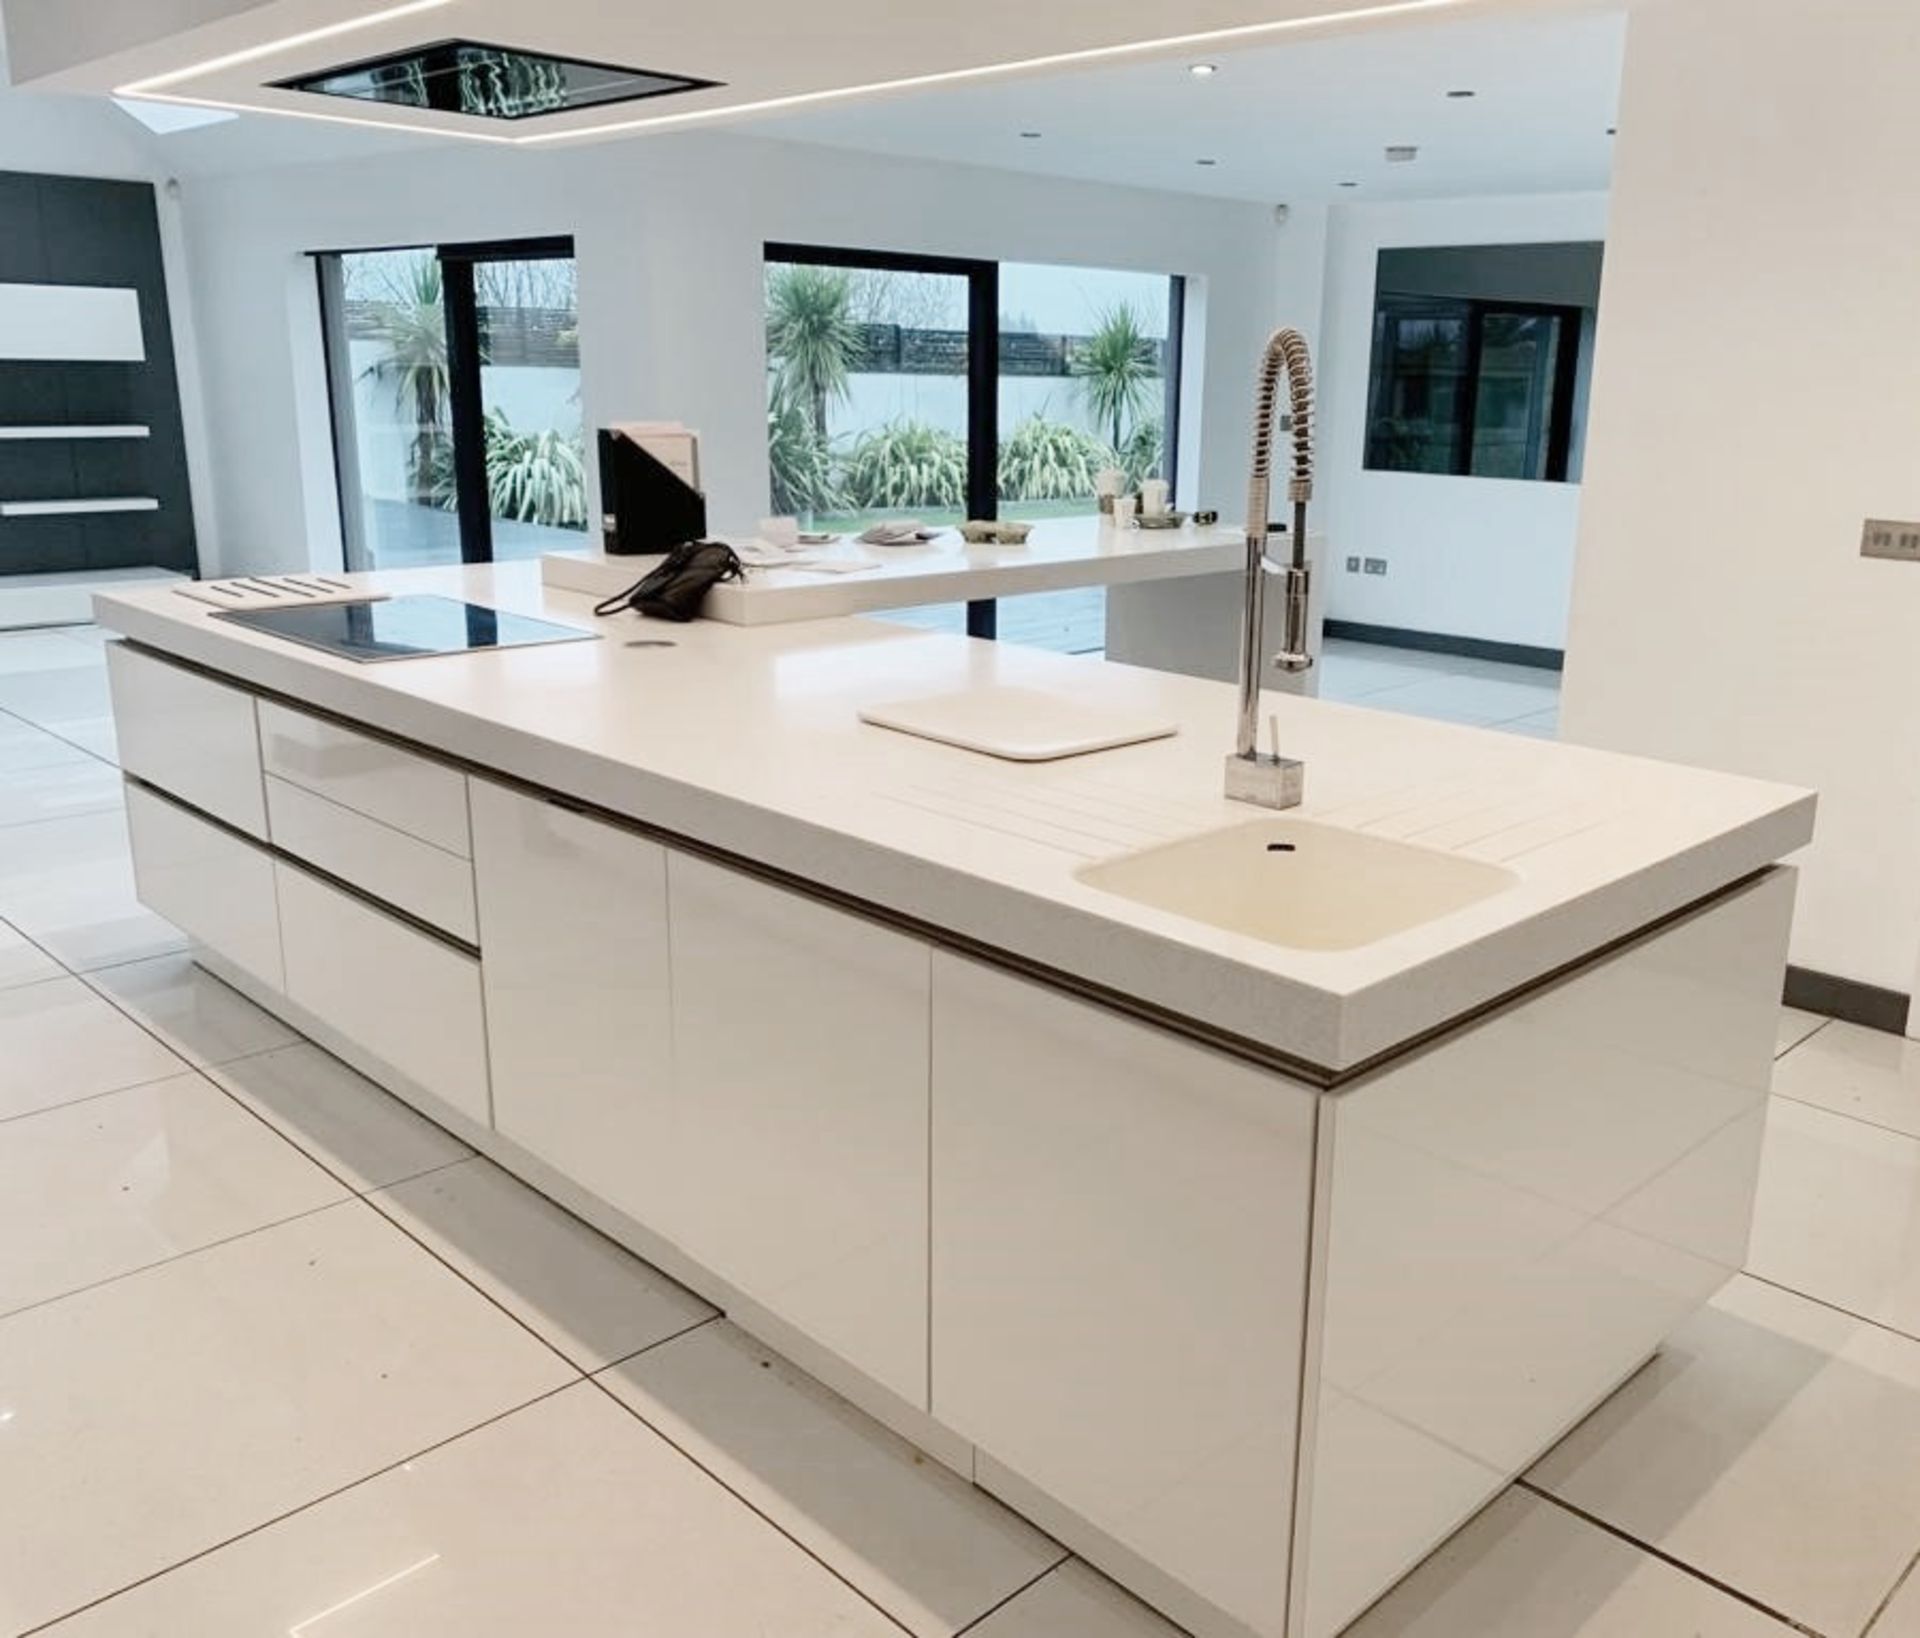 1 x SieMatic Contemporary Fitted Kitchen With Branded Appliances, Central Island + Corian Worktops - Image 8 of 100